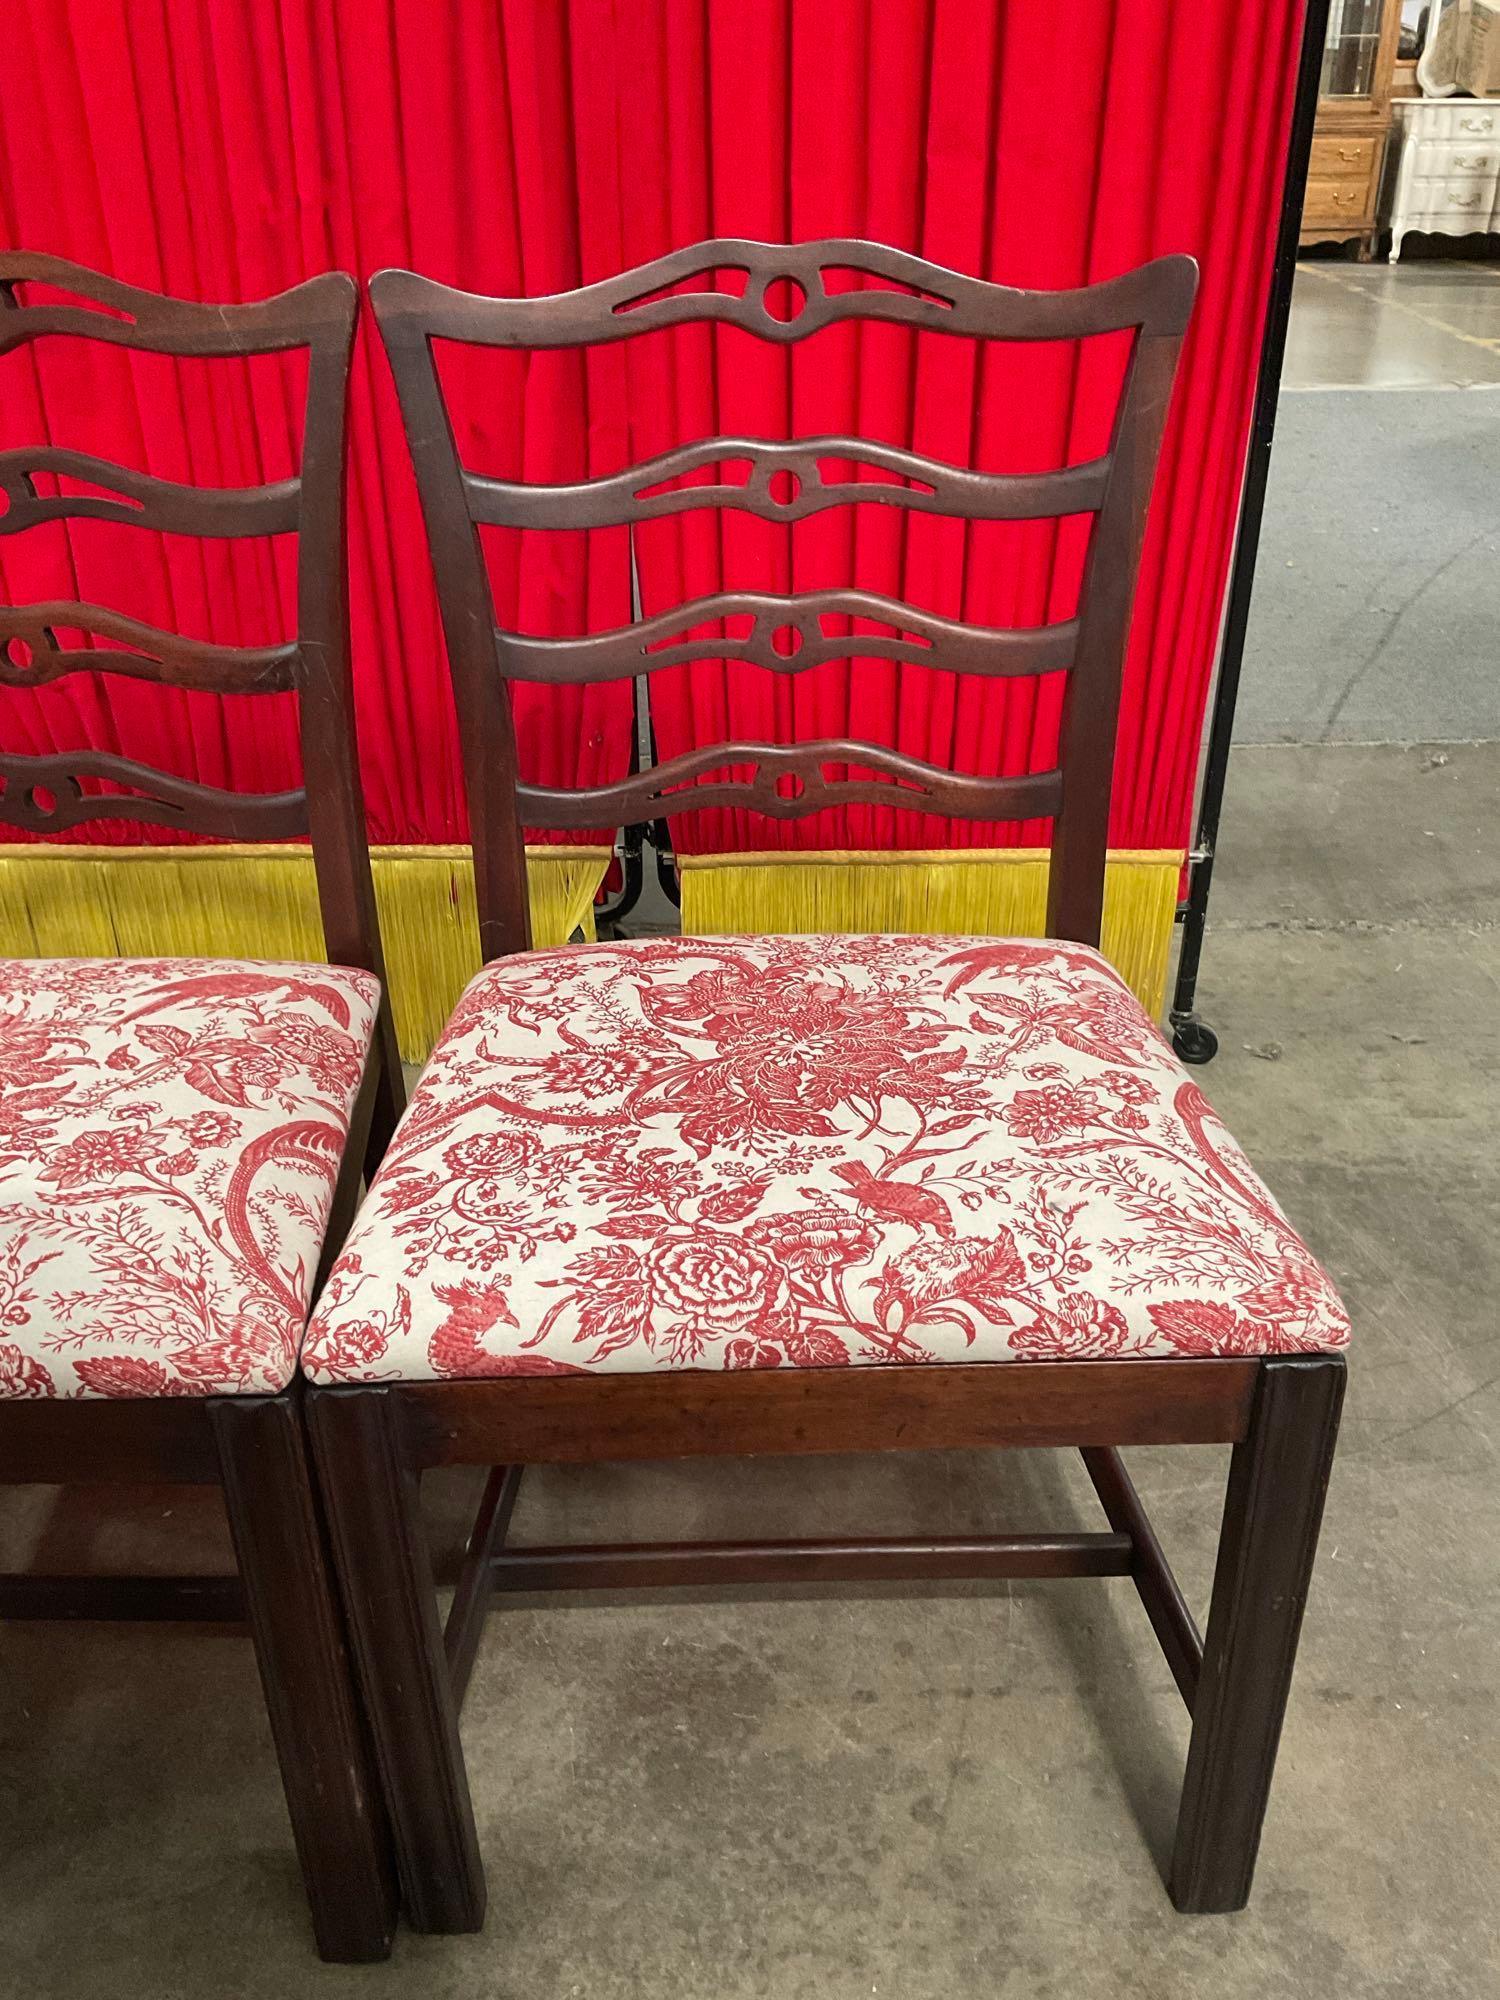 6 pcs Antique Cherry Ladder Back Dining Chairs w/ Red Paisley Upholstery. See pics.